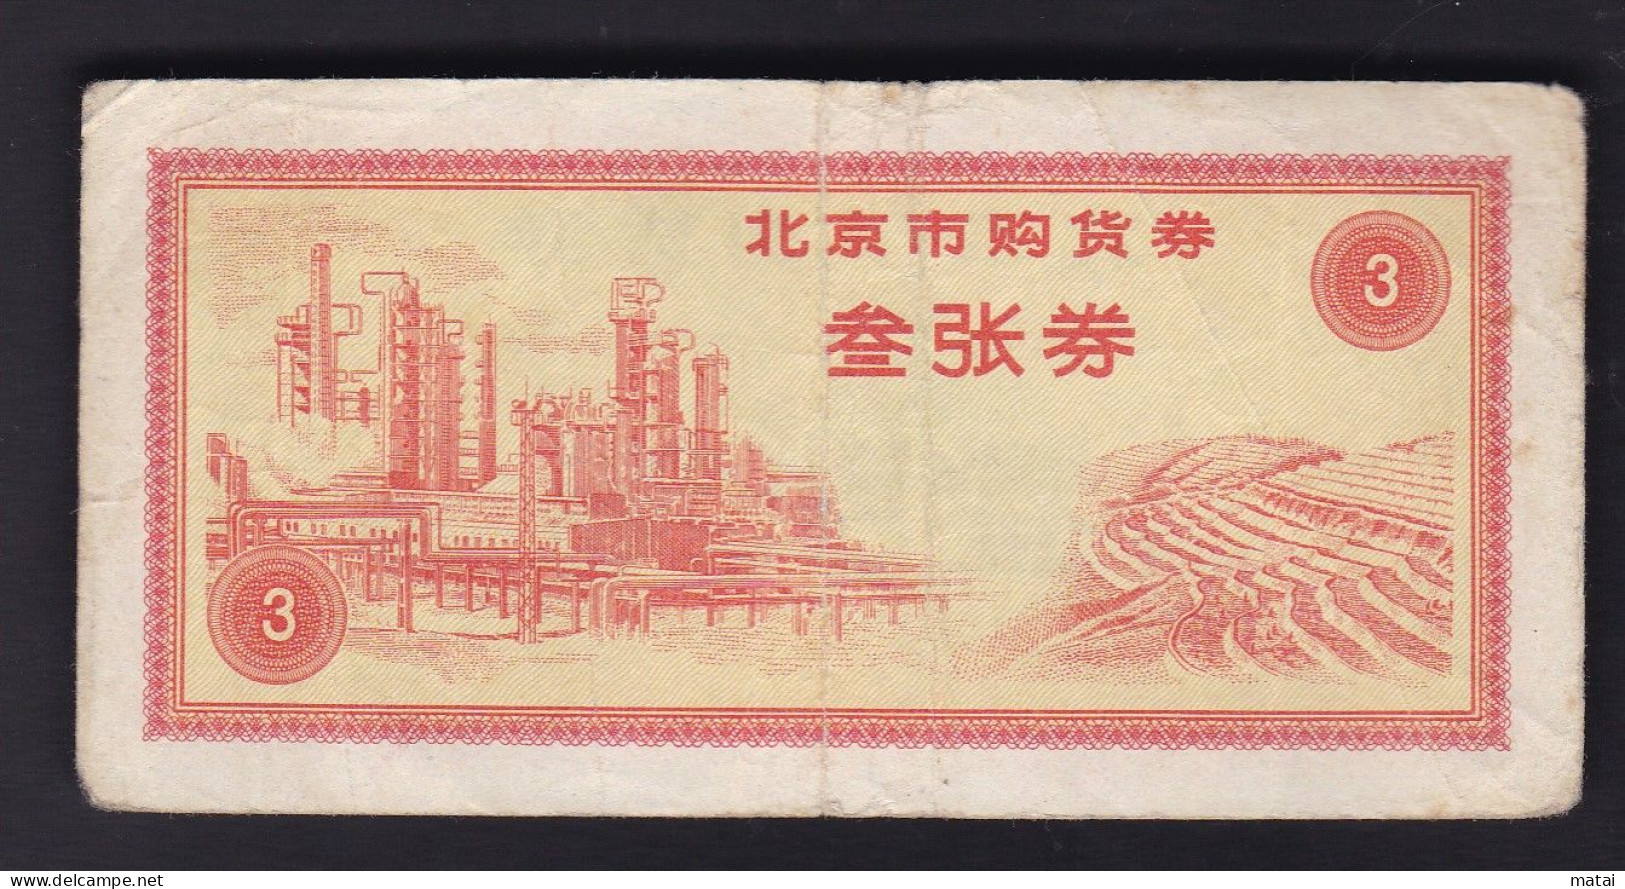 CHINA 1971 Beijing Purchase Voucher Three Coupon - Tickets - Entradas